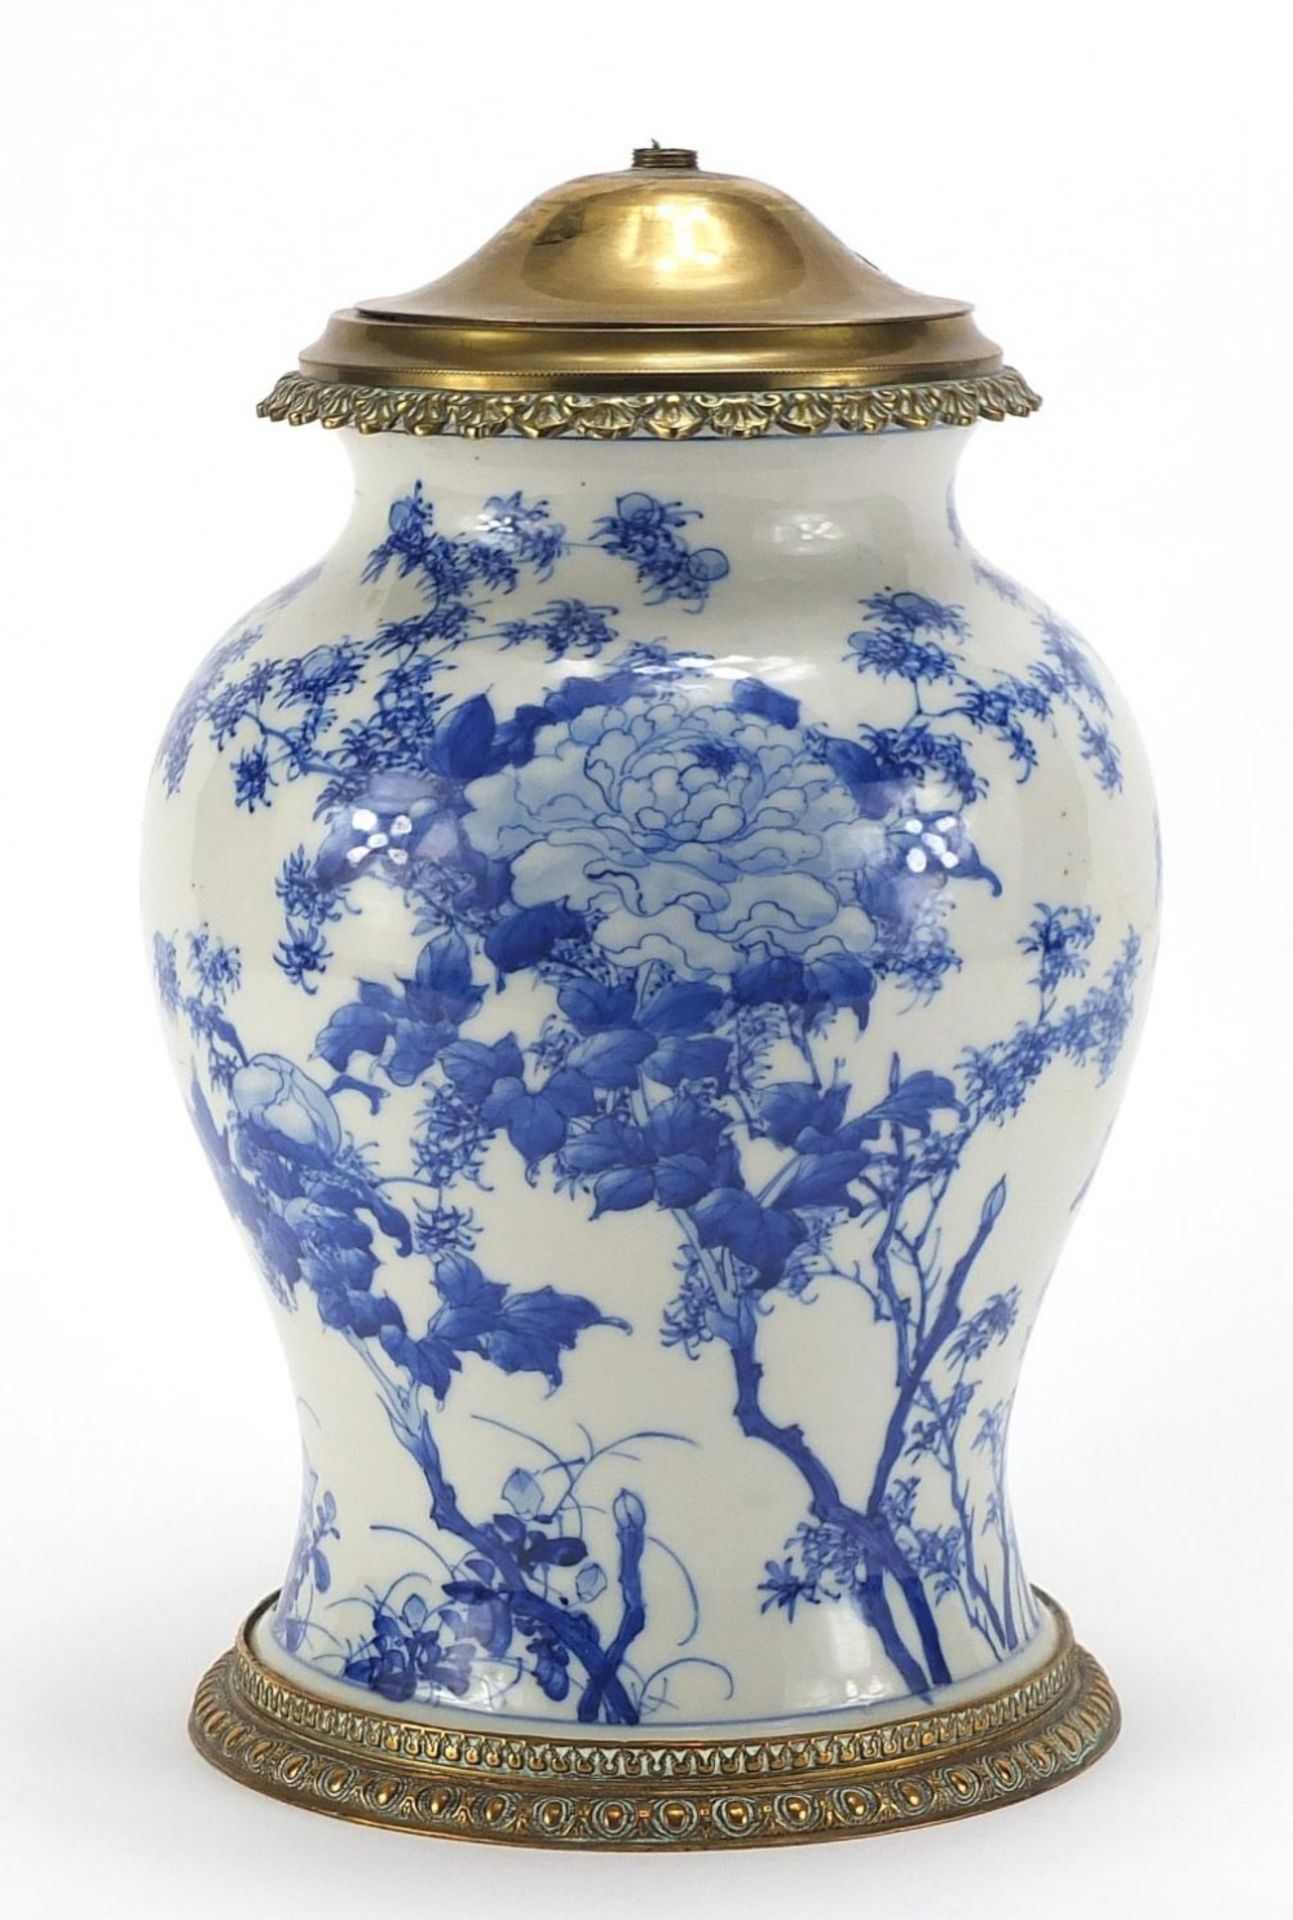 Japanese blue and white porcelain baluster vase table lamp with brass mounts, hand painted with